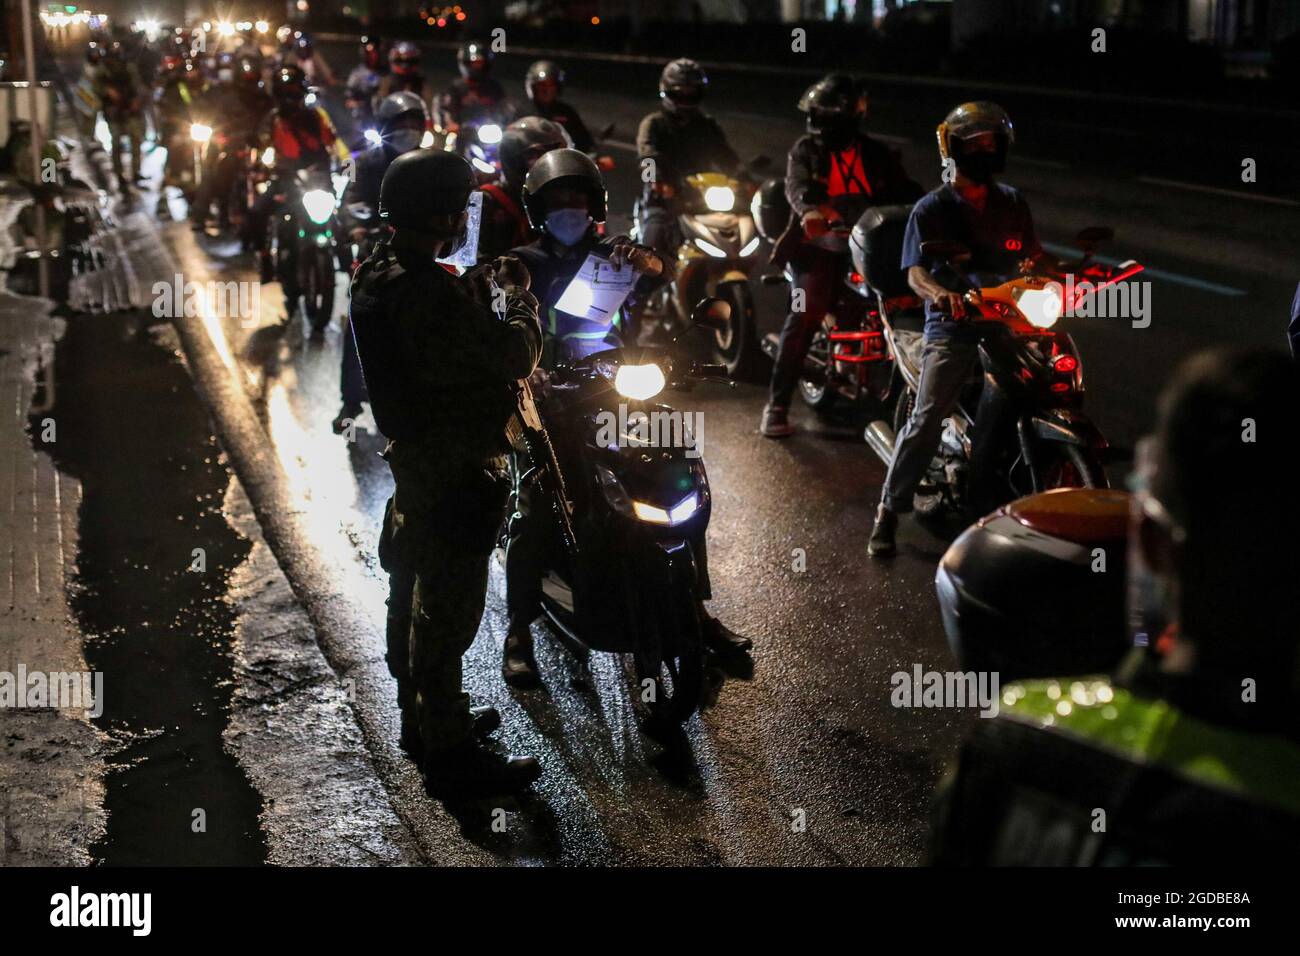 Policemen wearing protective equipment inspect motorcycle riders at a checkpoint during a stricter lockdown as a precaution against the spread of the new coronavirus disease at the outskirts of Marikina City, Philippines. Stock Photo